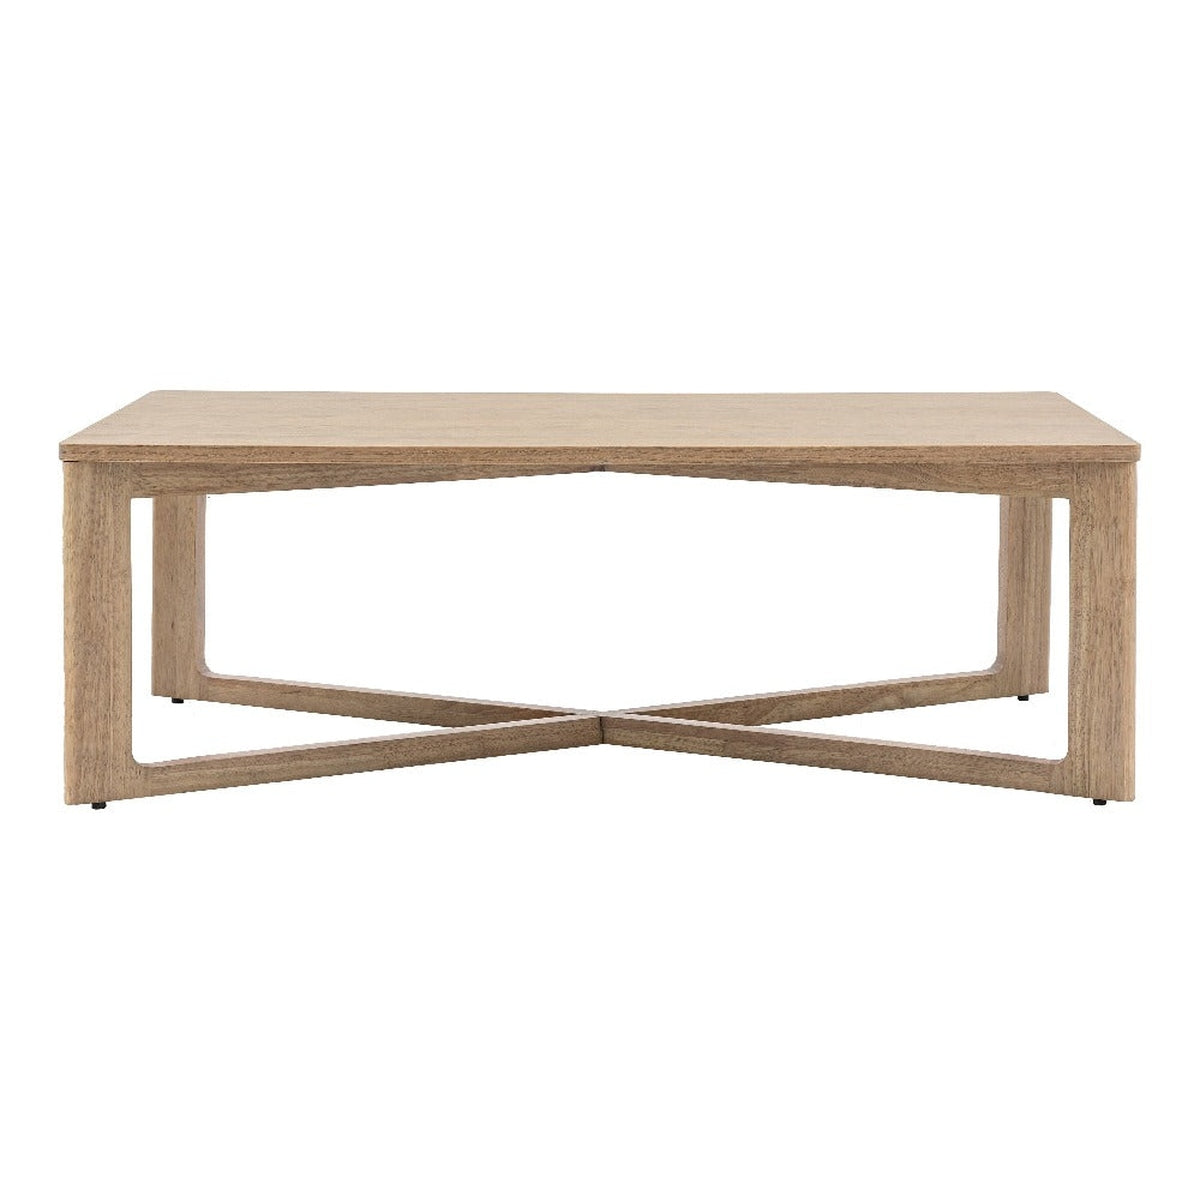 Gallery Interiors Panelled Coffee Table